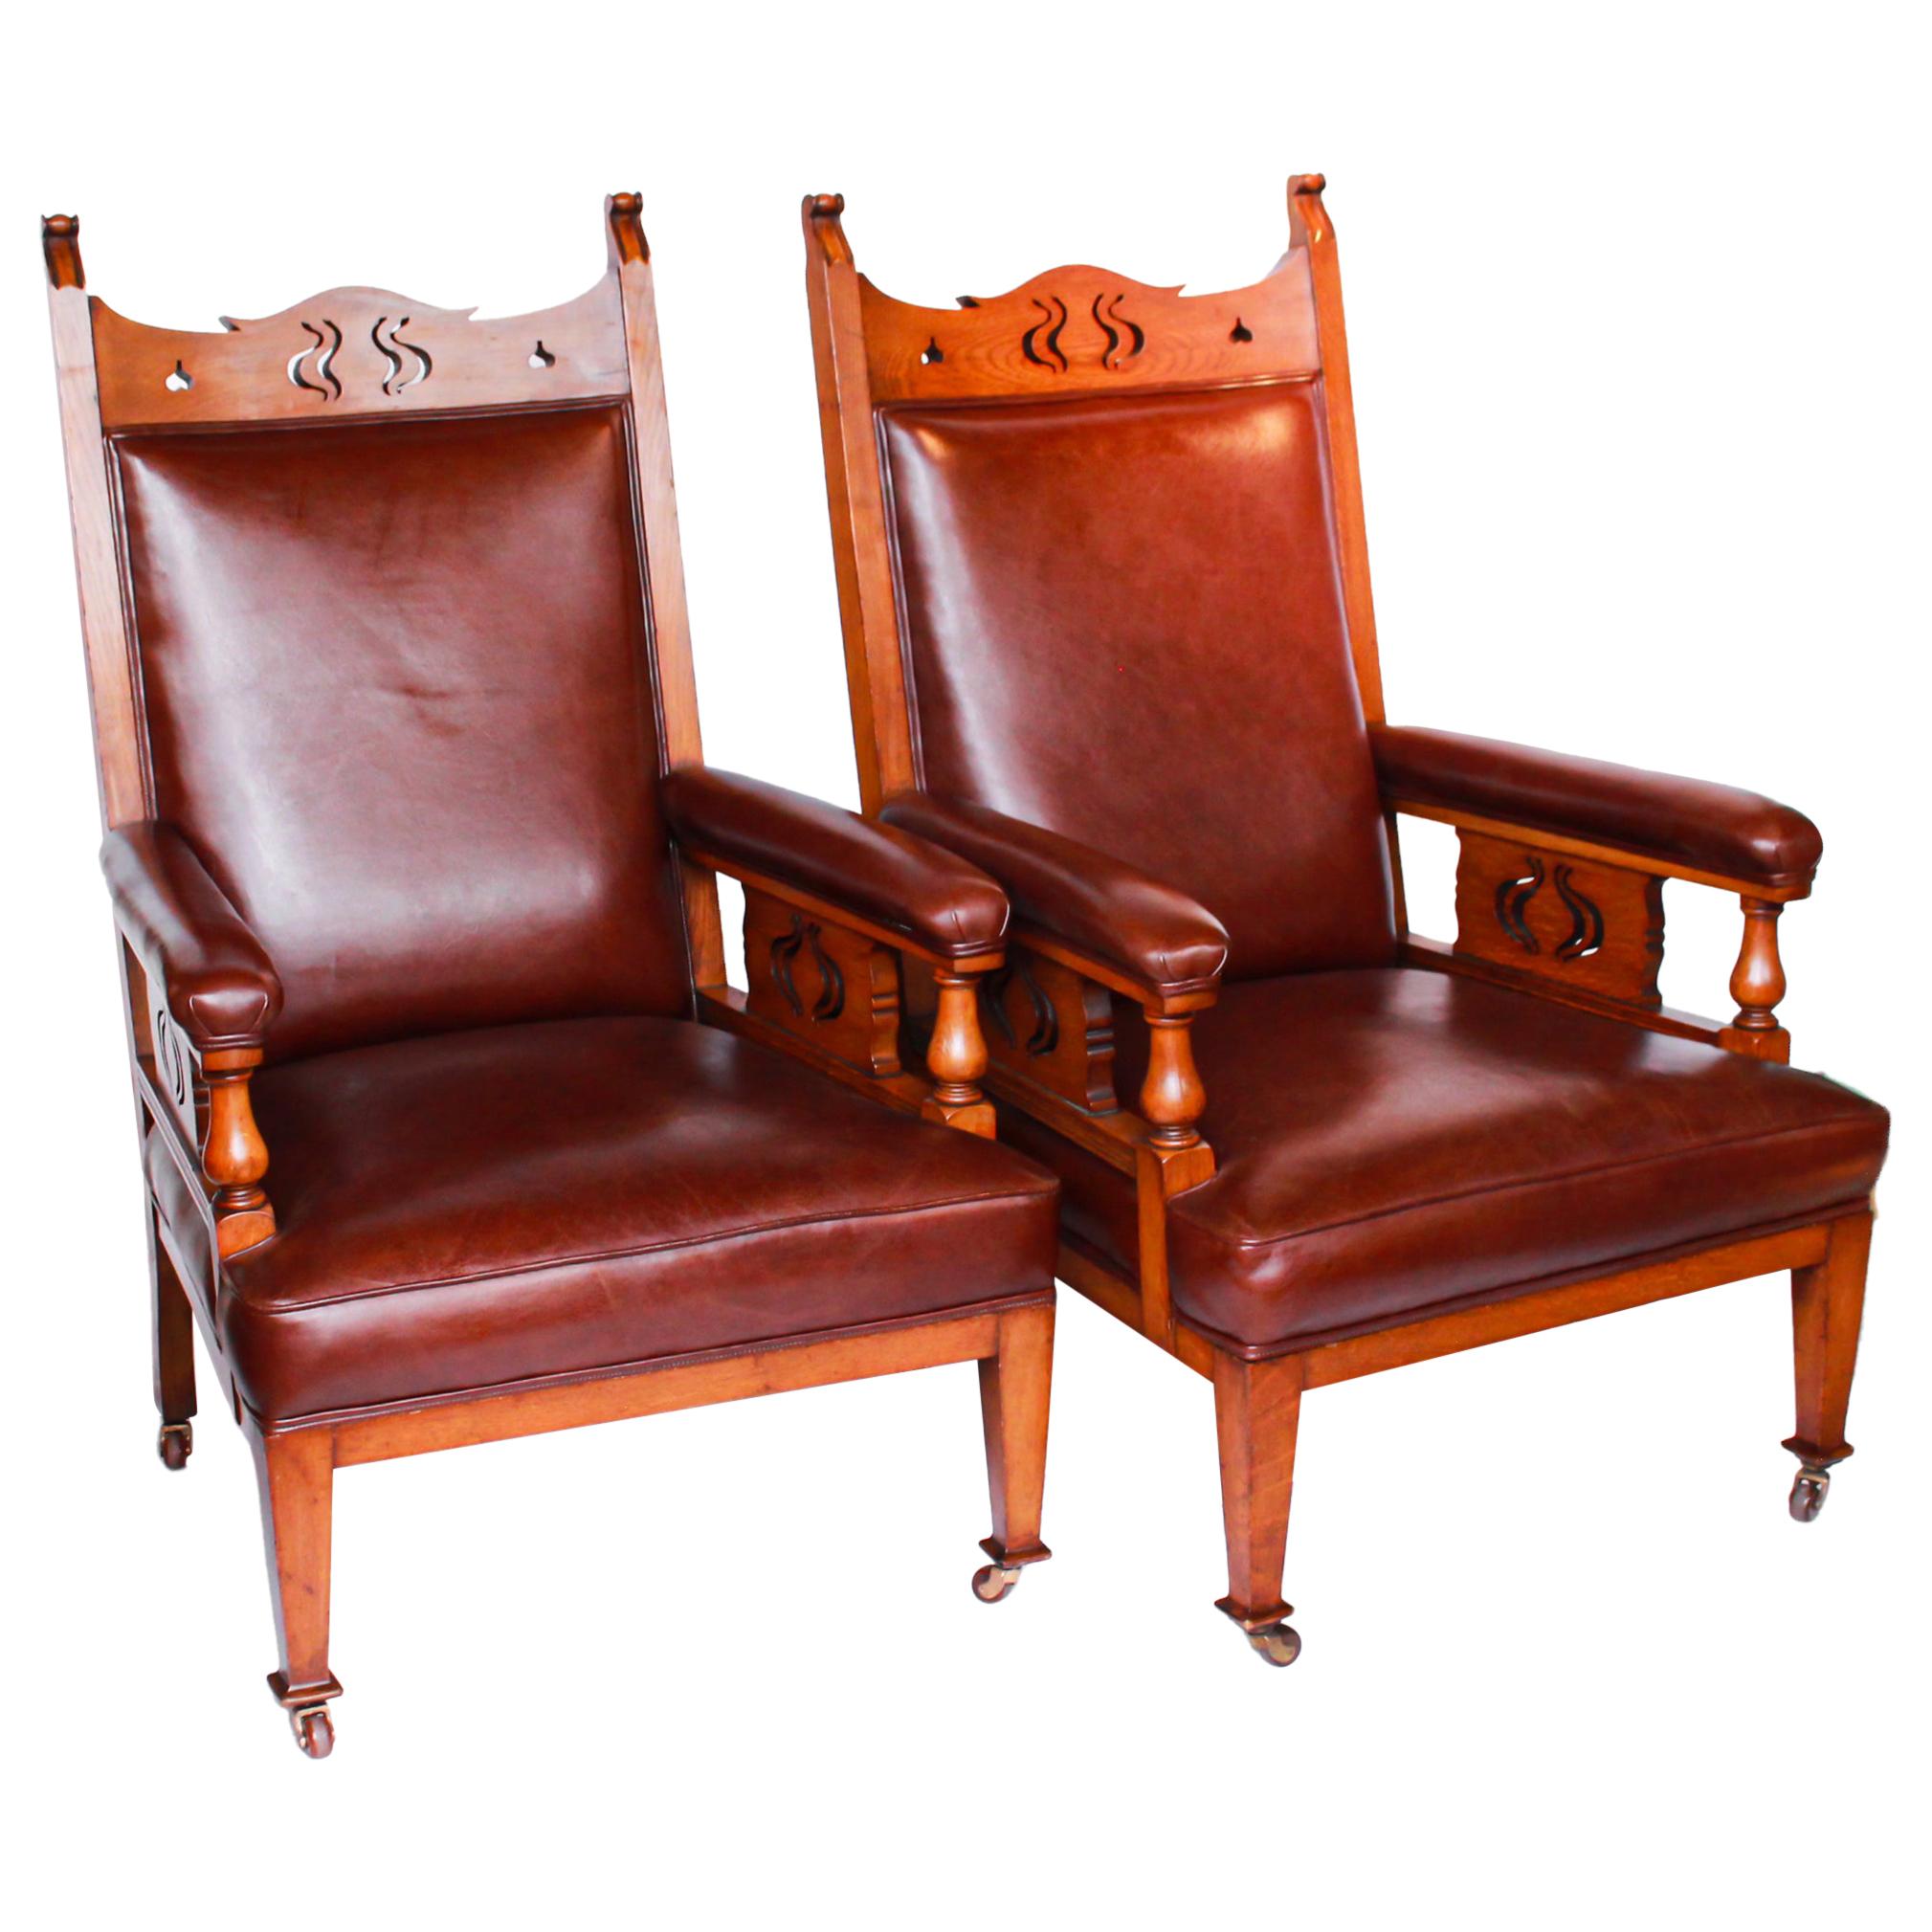 A Pair of Arts & Craft's Library Chairs Solid Oak Upholstery in Chestnut Leather